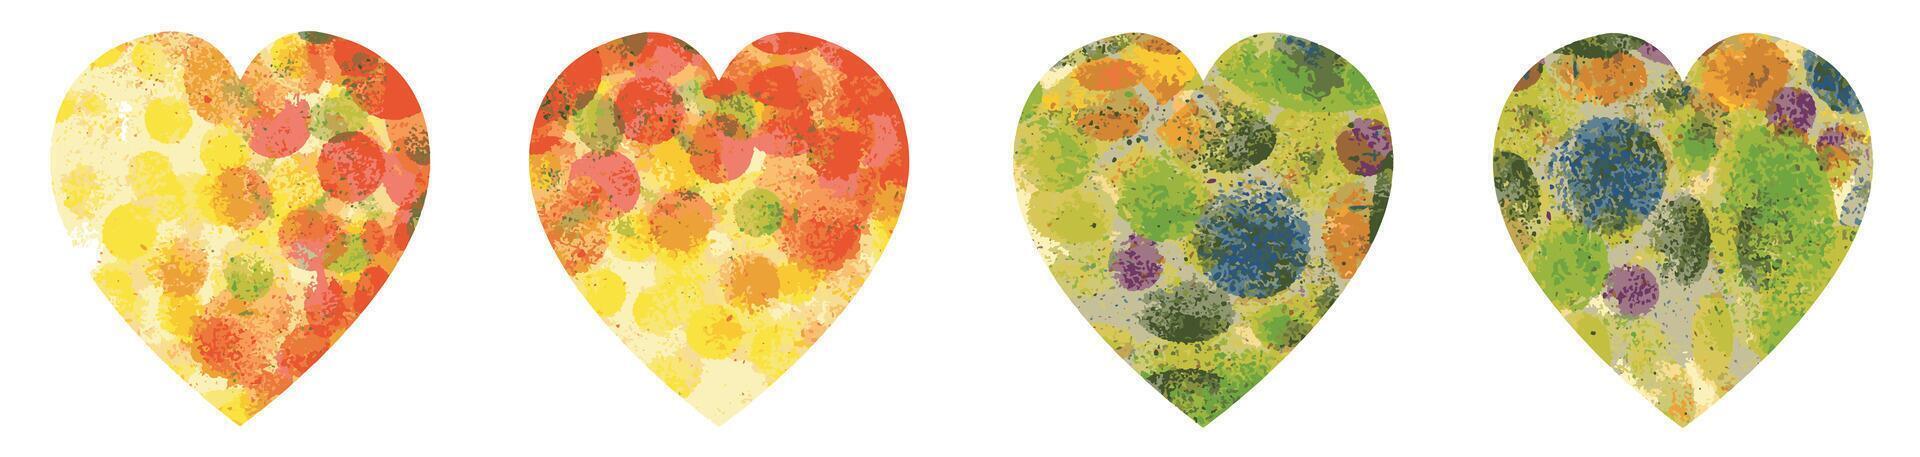 Heart abstract art for layout or banner design by hand acrylic color painting. vector